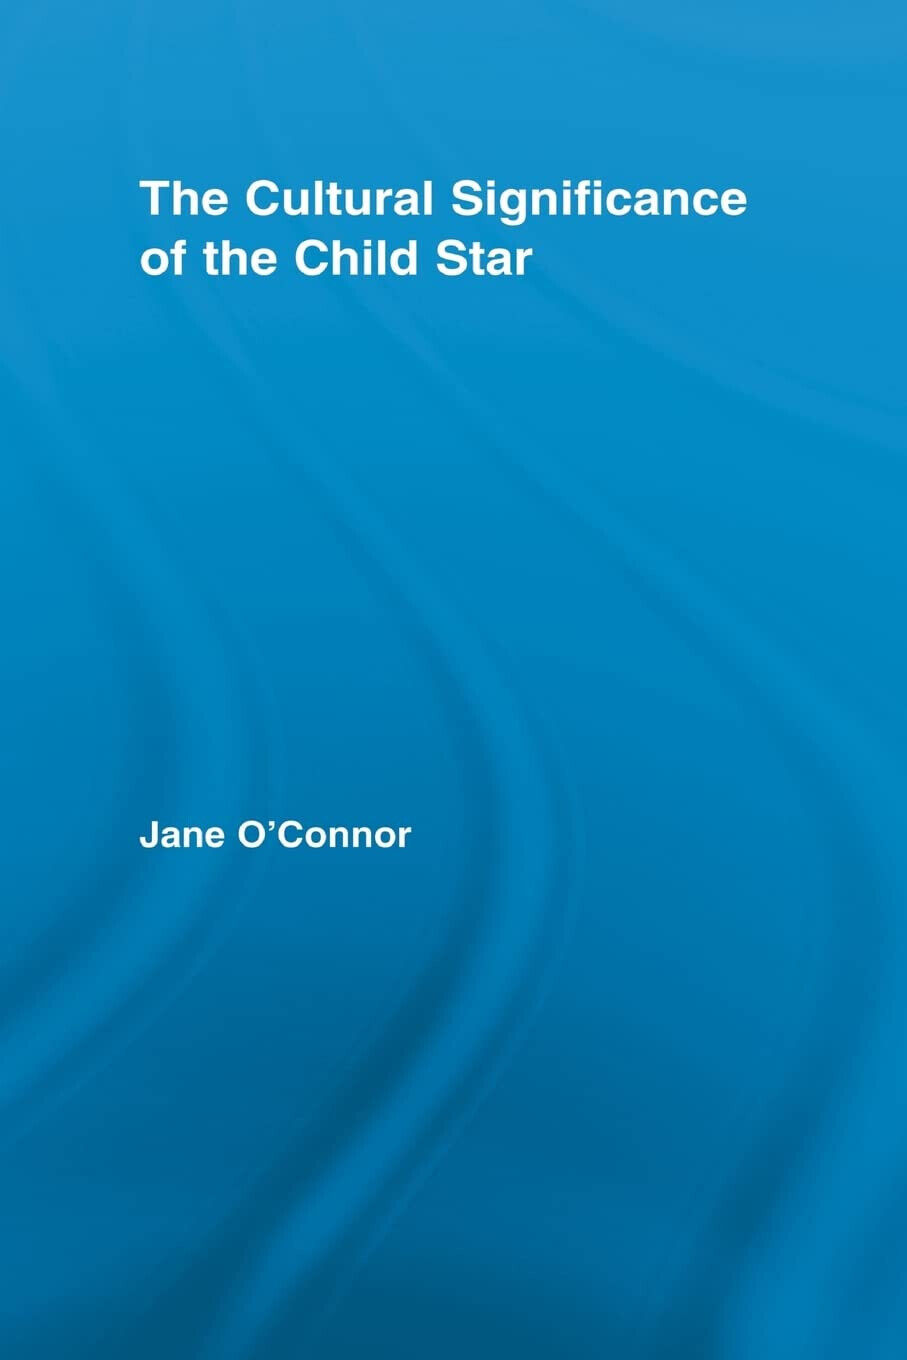 The Cultural Significance of the Child Star - Jane Catherine - 2012